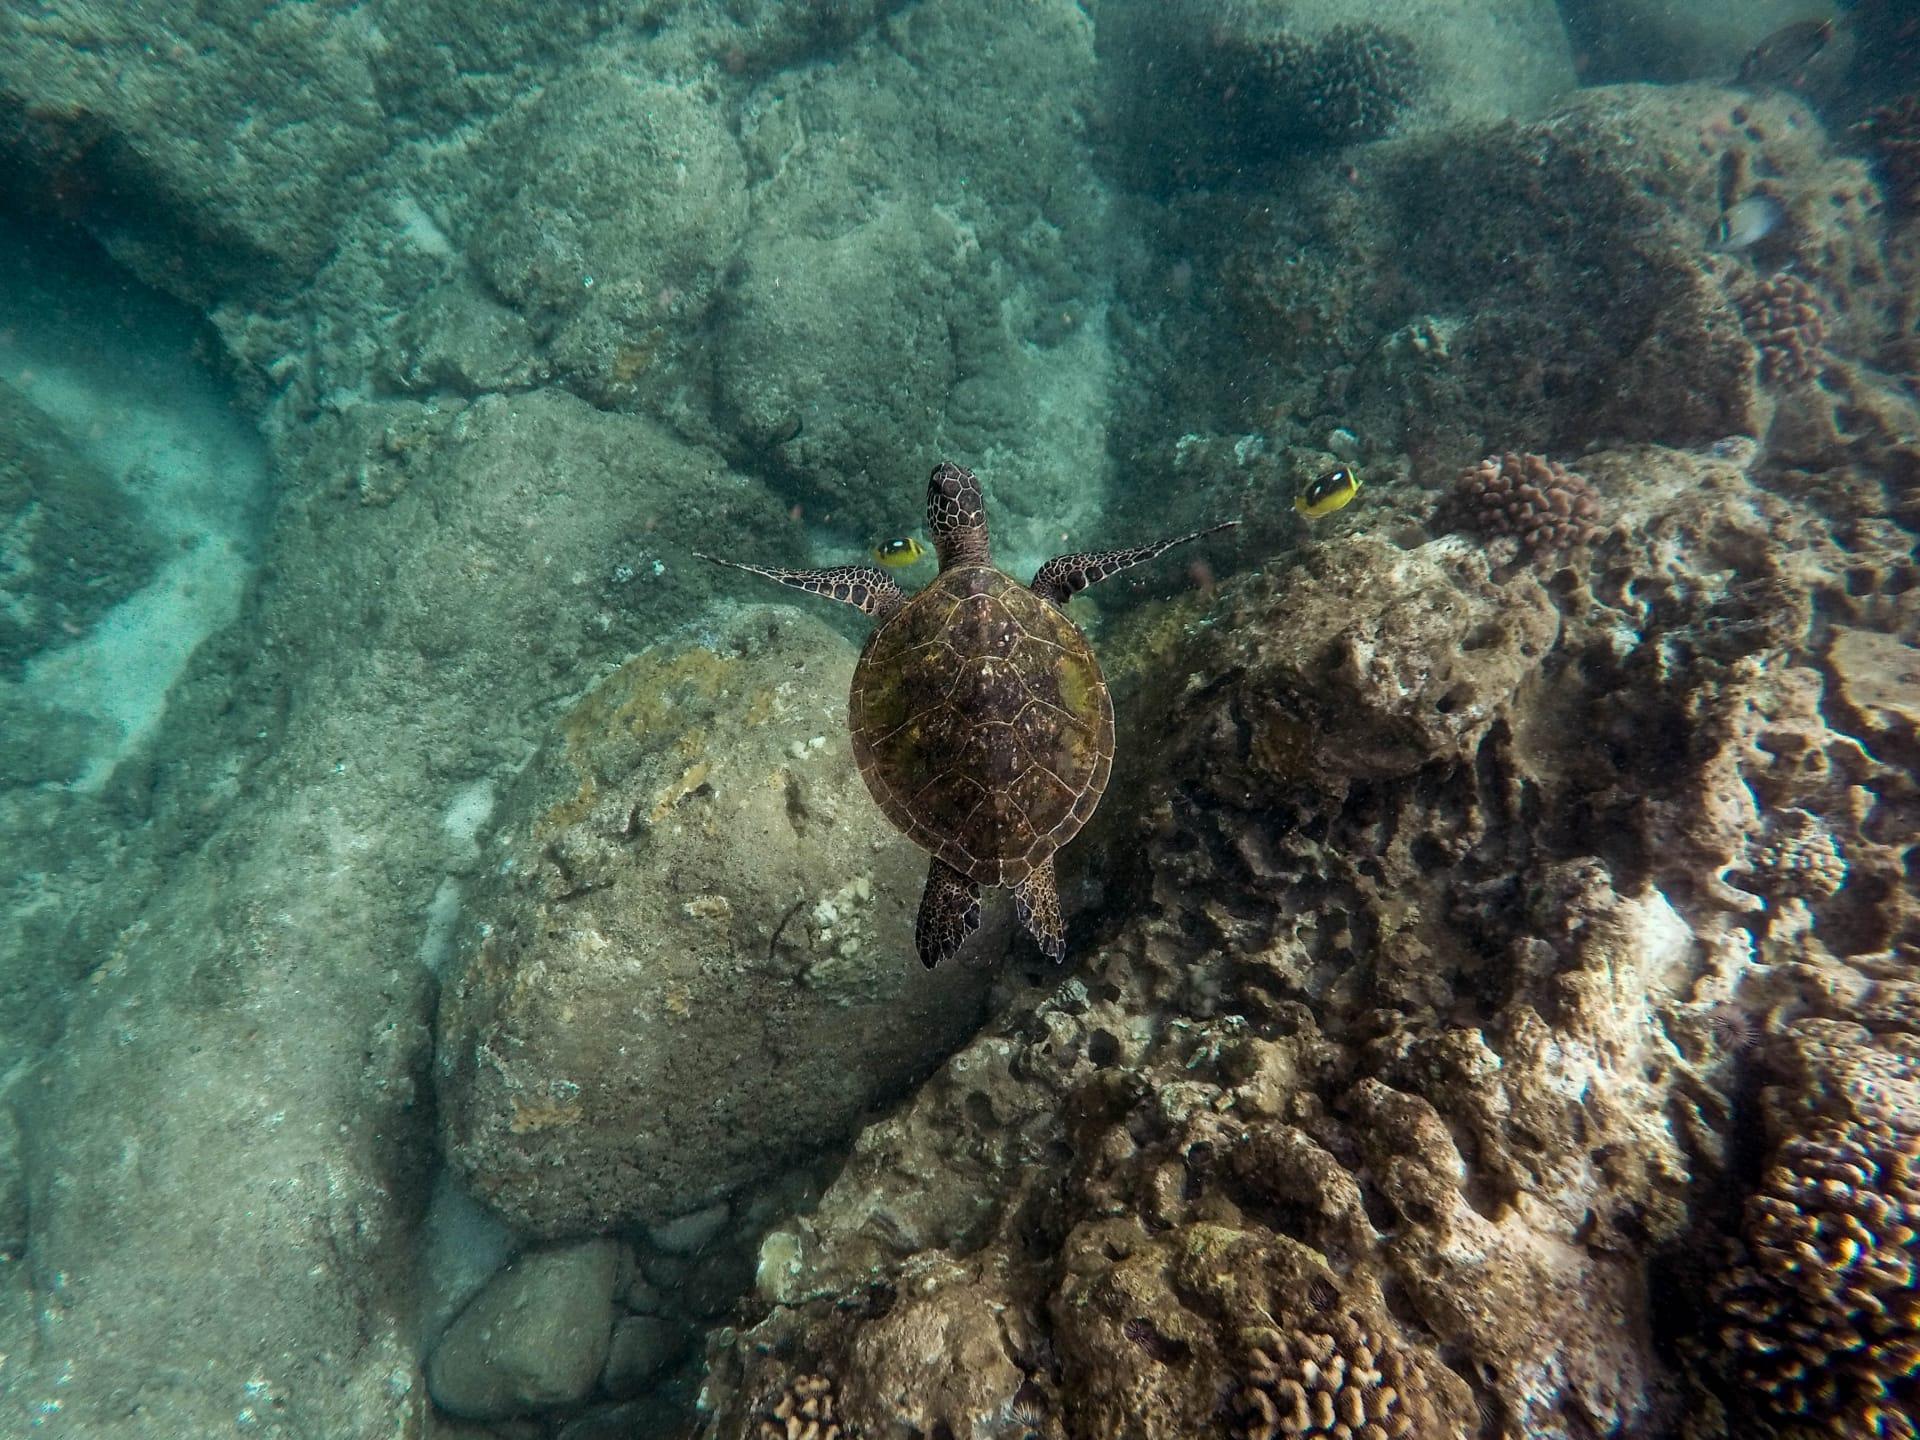 Sea turtle pictures